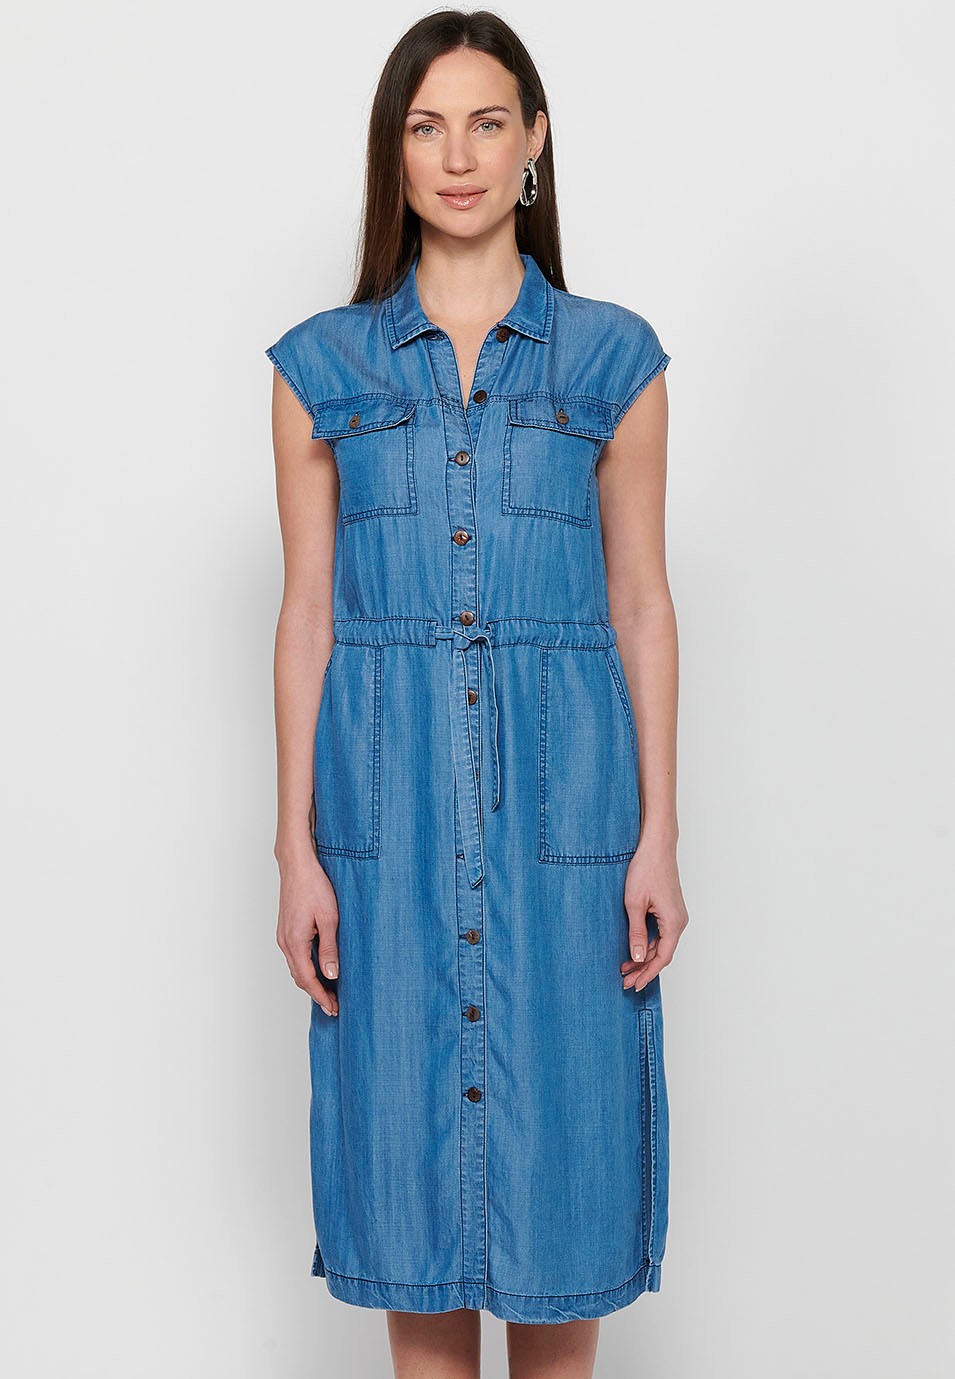 Women's Sleeveless Shirt Style Long Dress with Adjustable Waist with Drawstring and Button Front Closure in Blue 4